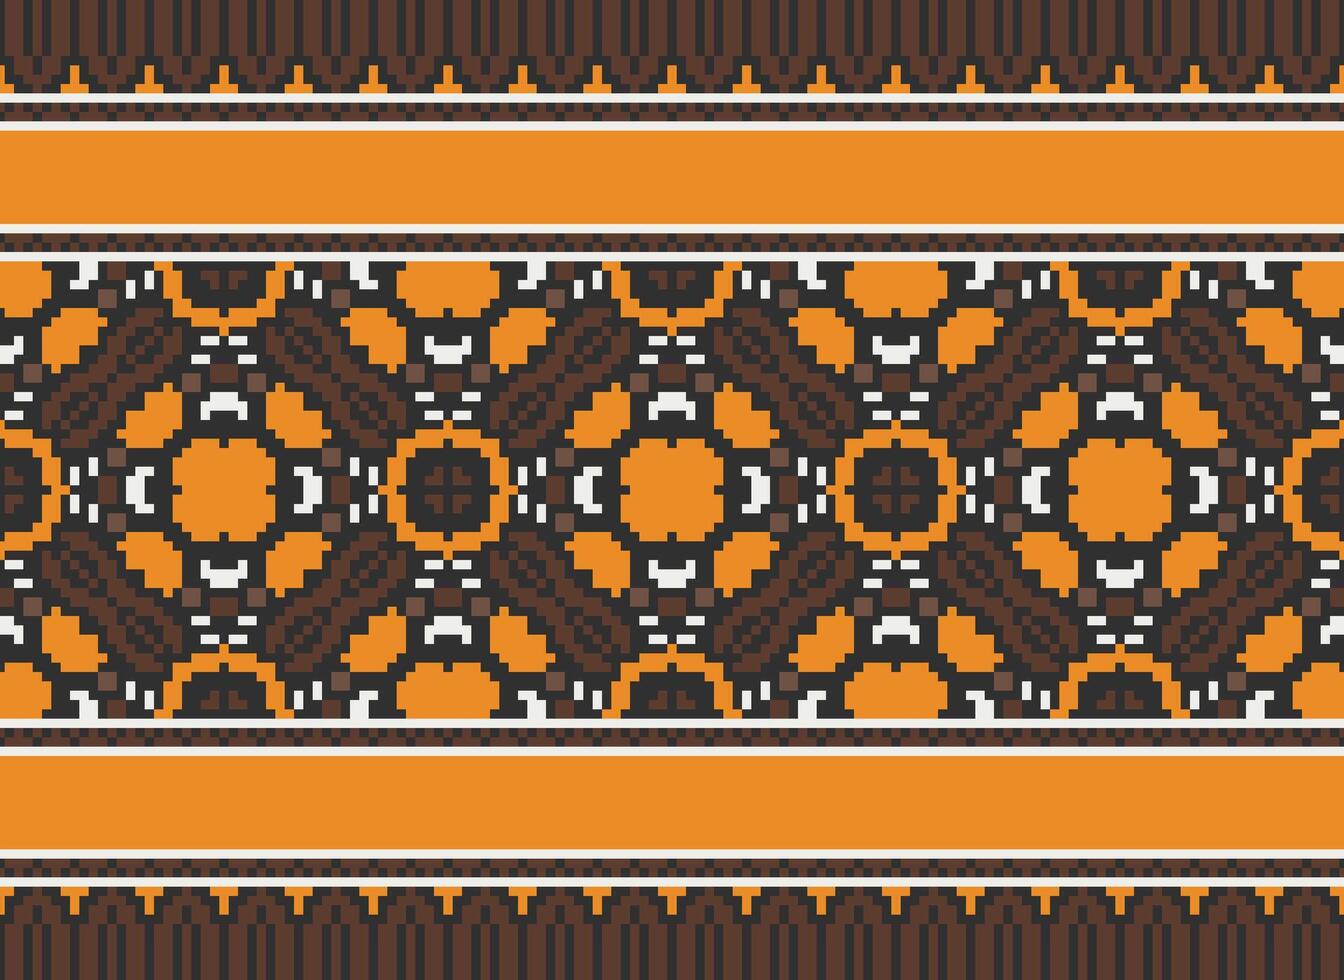 Beautiful pixel patterns traditional folk style, geometric ethnic seamless pattern vector illustration. Design for  cross stitch, carpet, wallpaper, clothing, texti fabric, wrapping, batik, embroidery